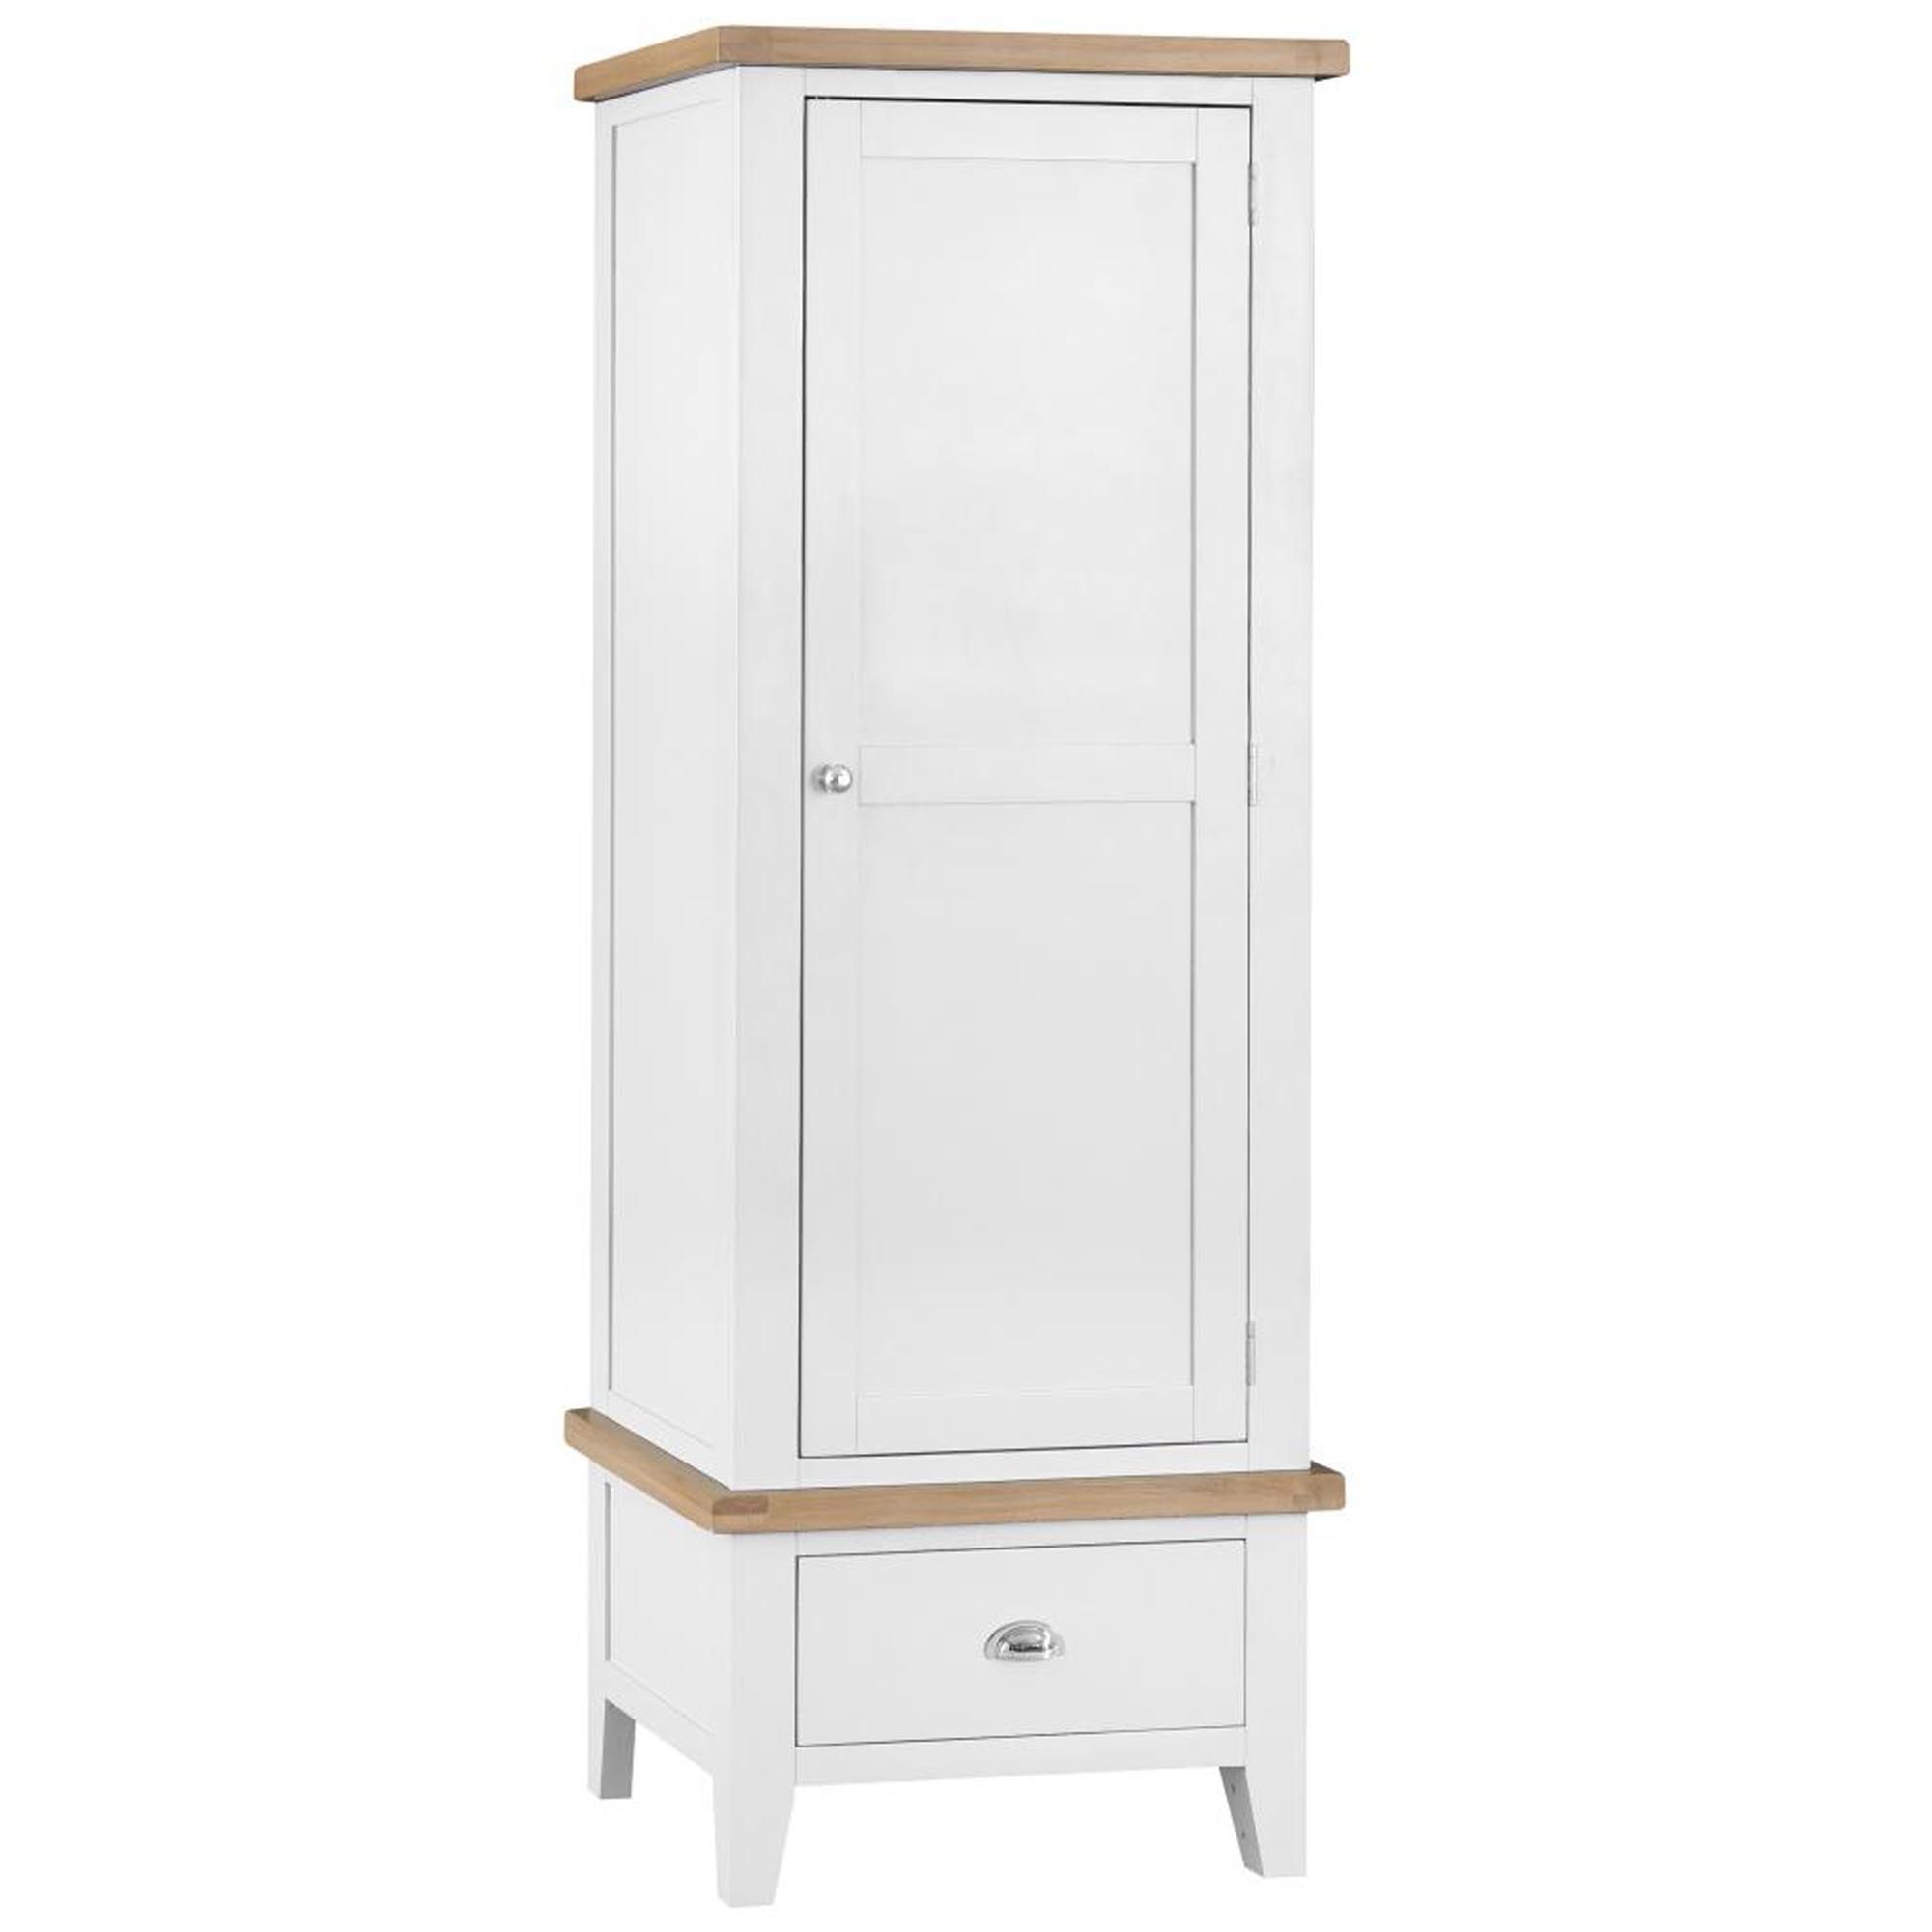 Trentino White Single Wardrobe | Bedroom Furniture | Homesdirect365 Intended For Single White Wardrobes (View 2 of 7)